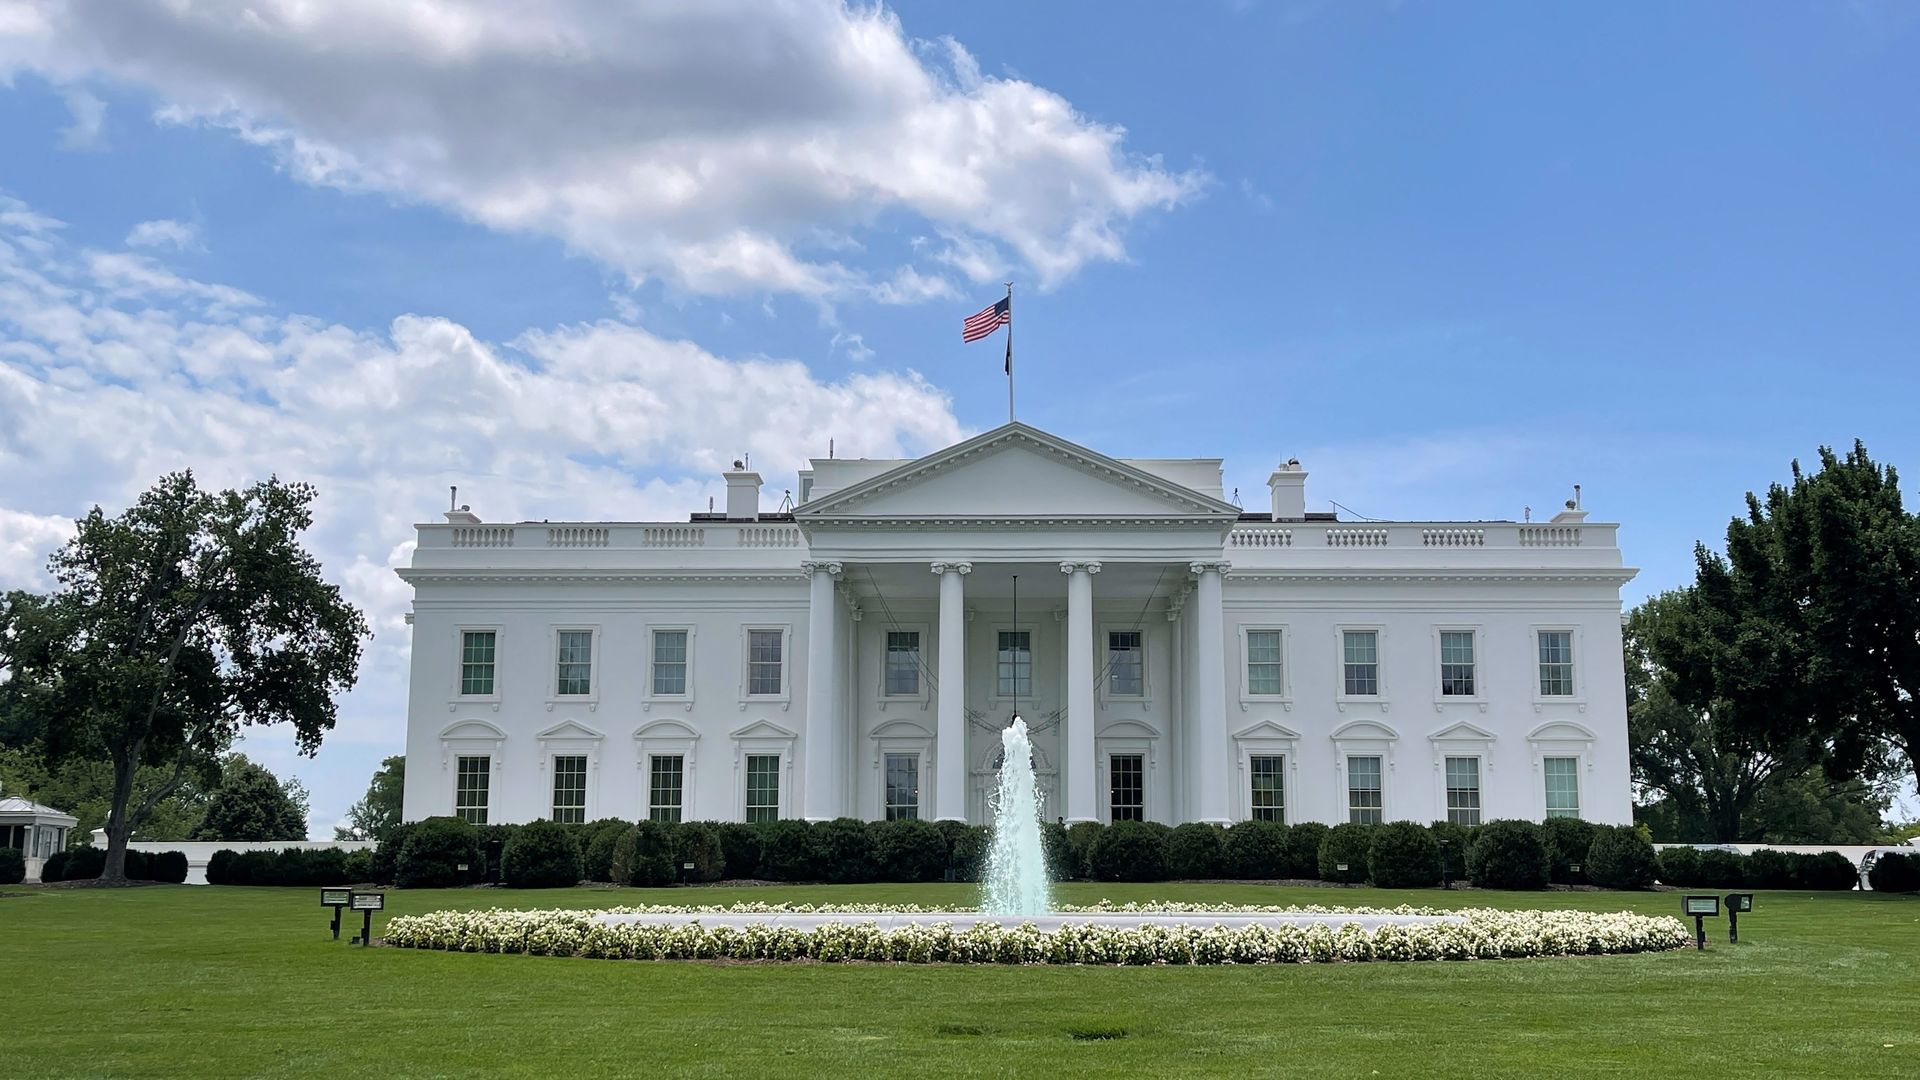 An exterior view of the White House.